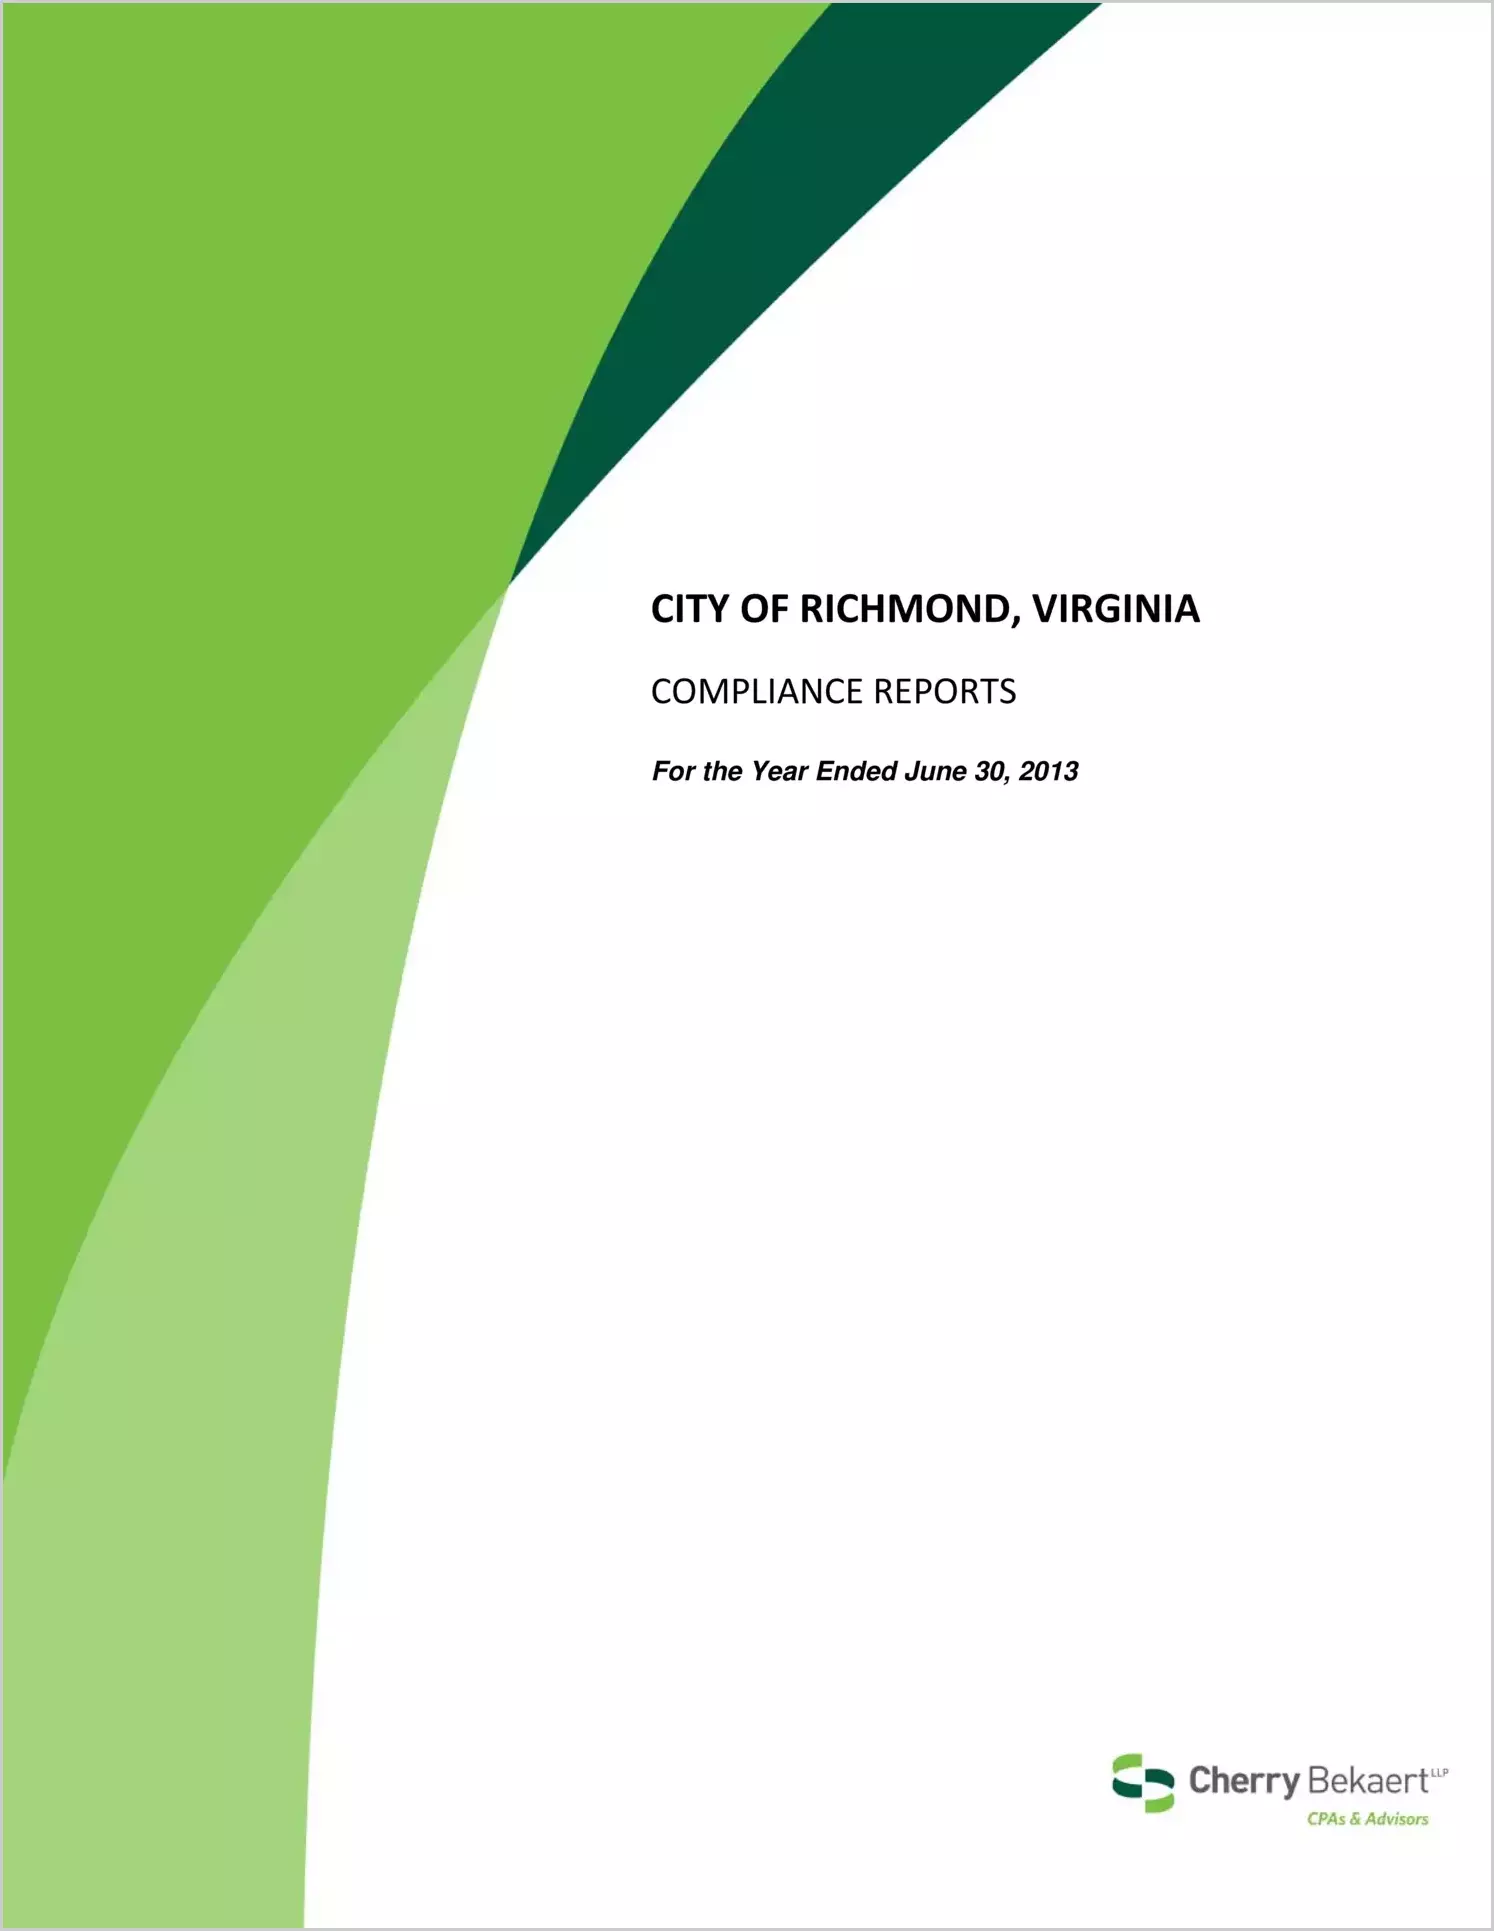 2013 Internal Control and Compliance Report for City of Richmond